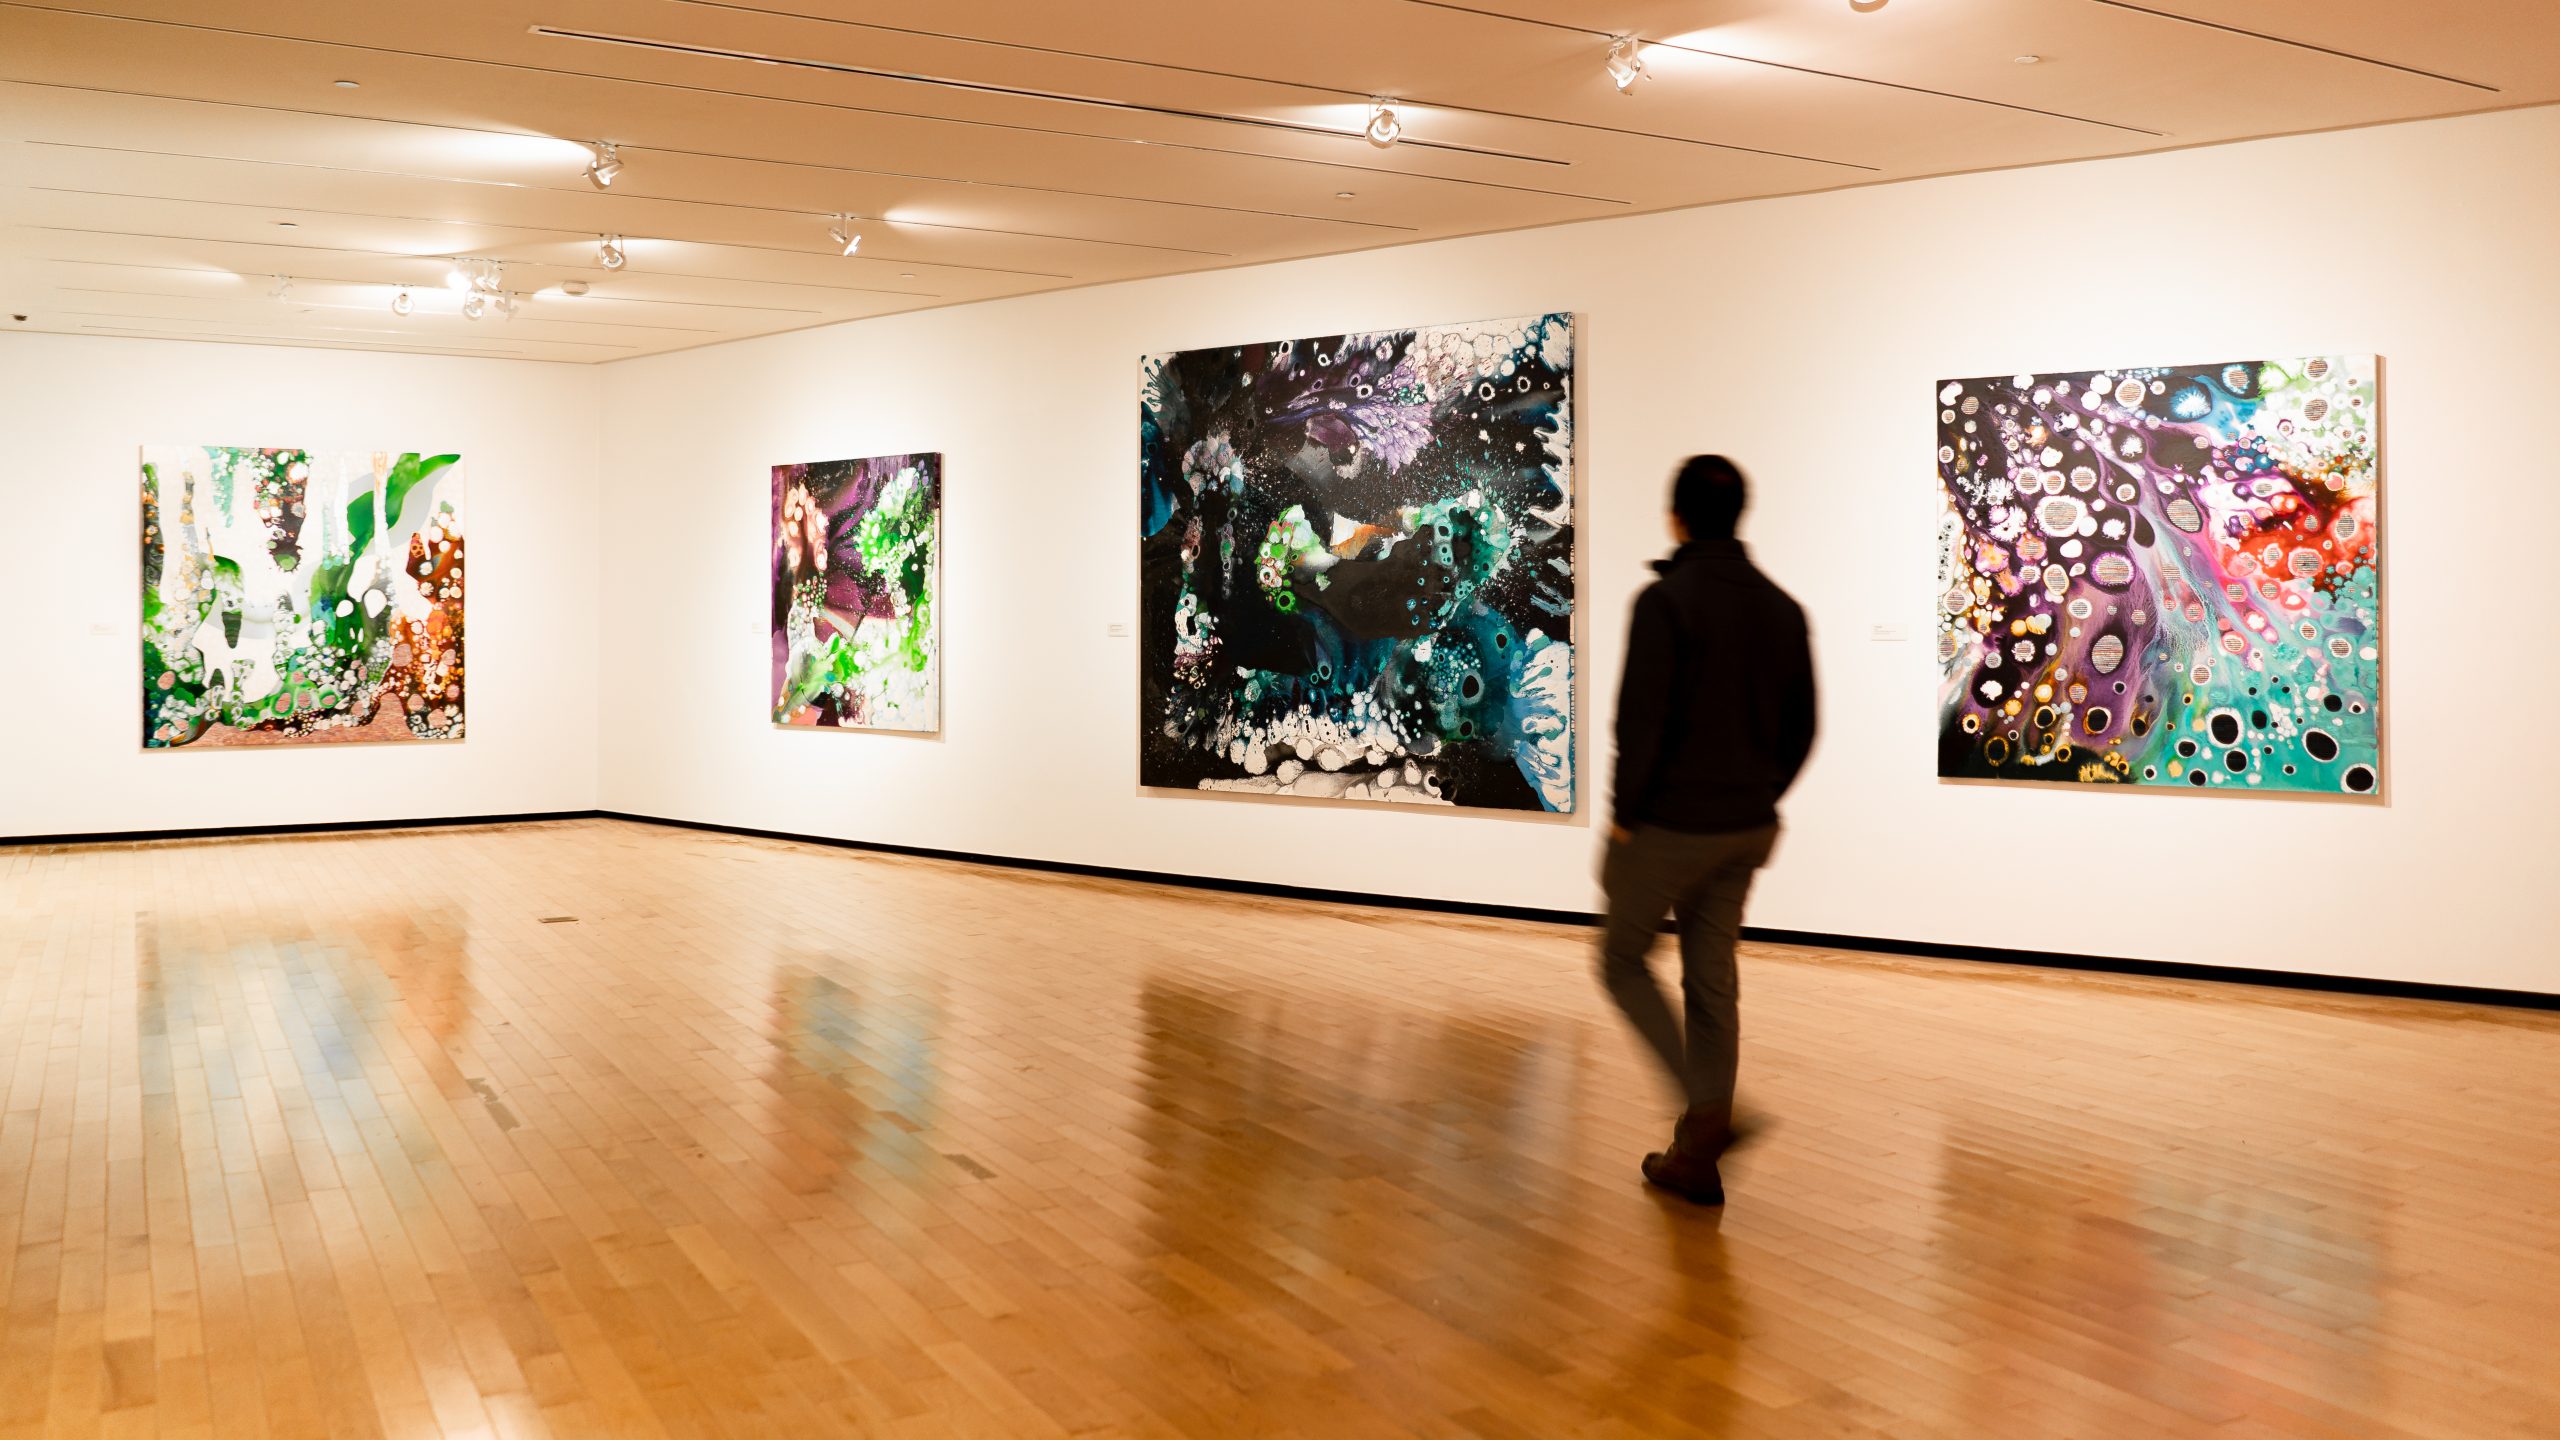 A man walks in a gallery filled with Abstract paintings.